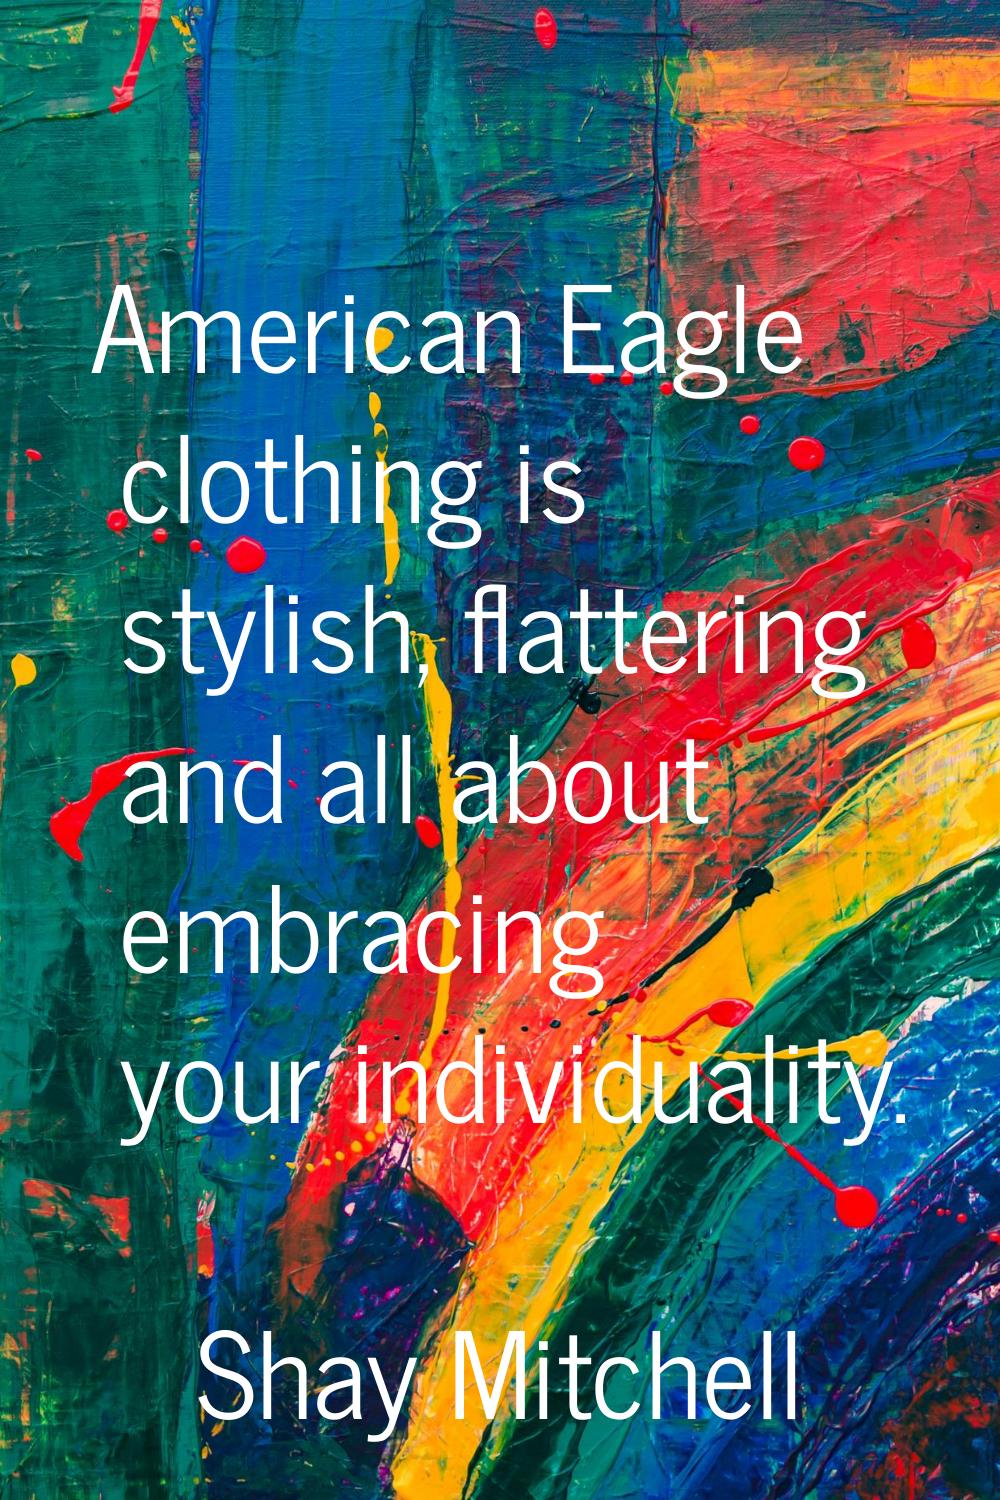 American Eagle clothing is stylish, flattering and all about embracing your individuality.